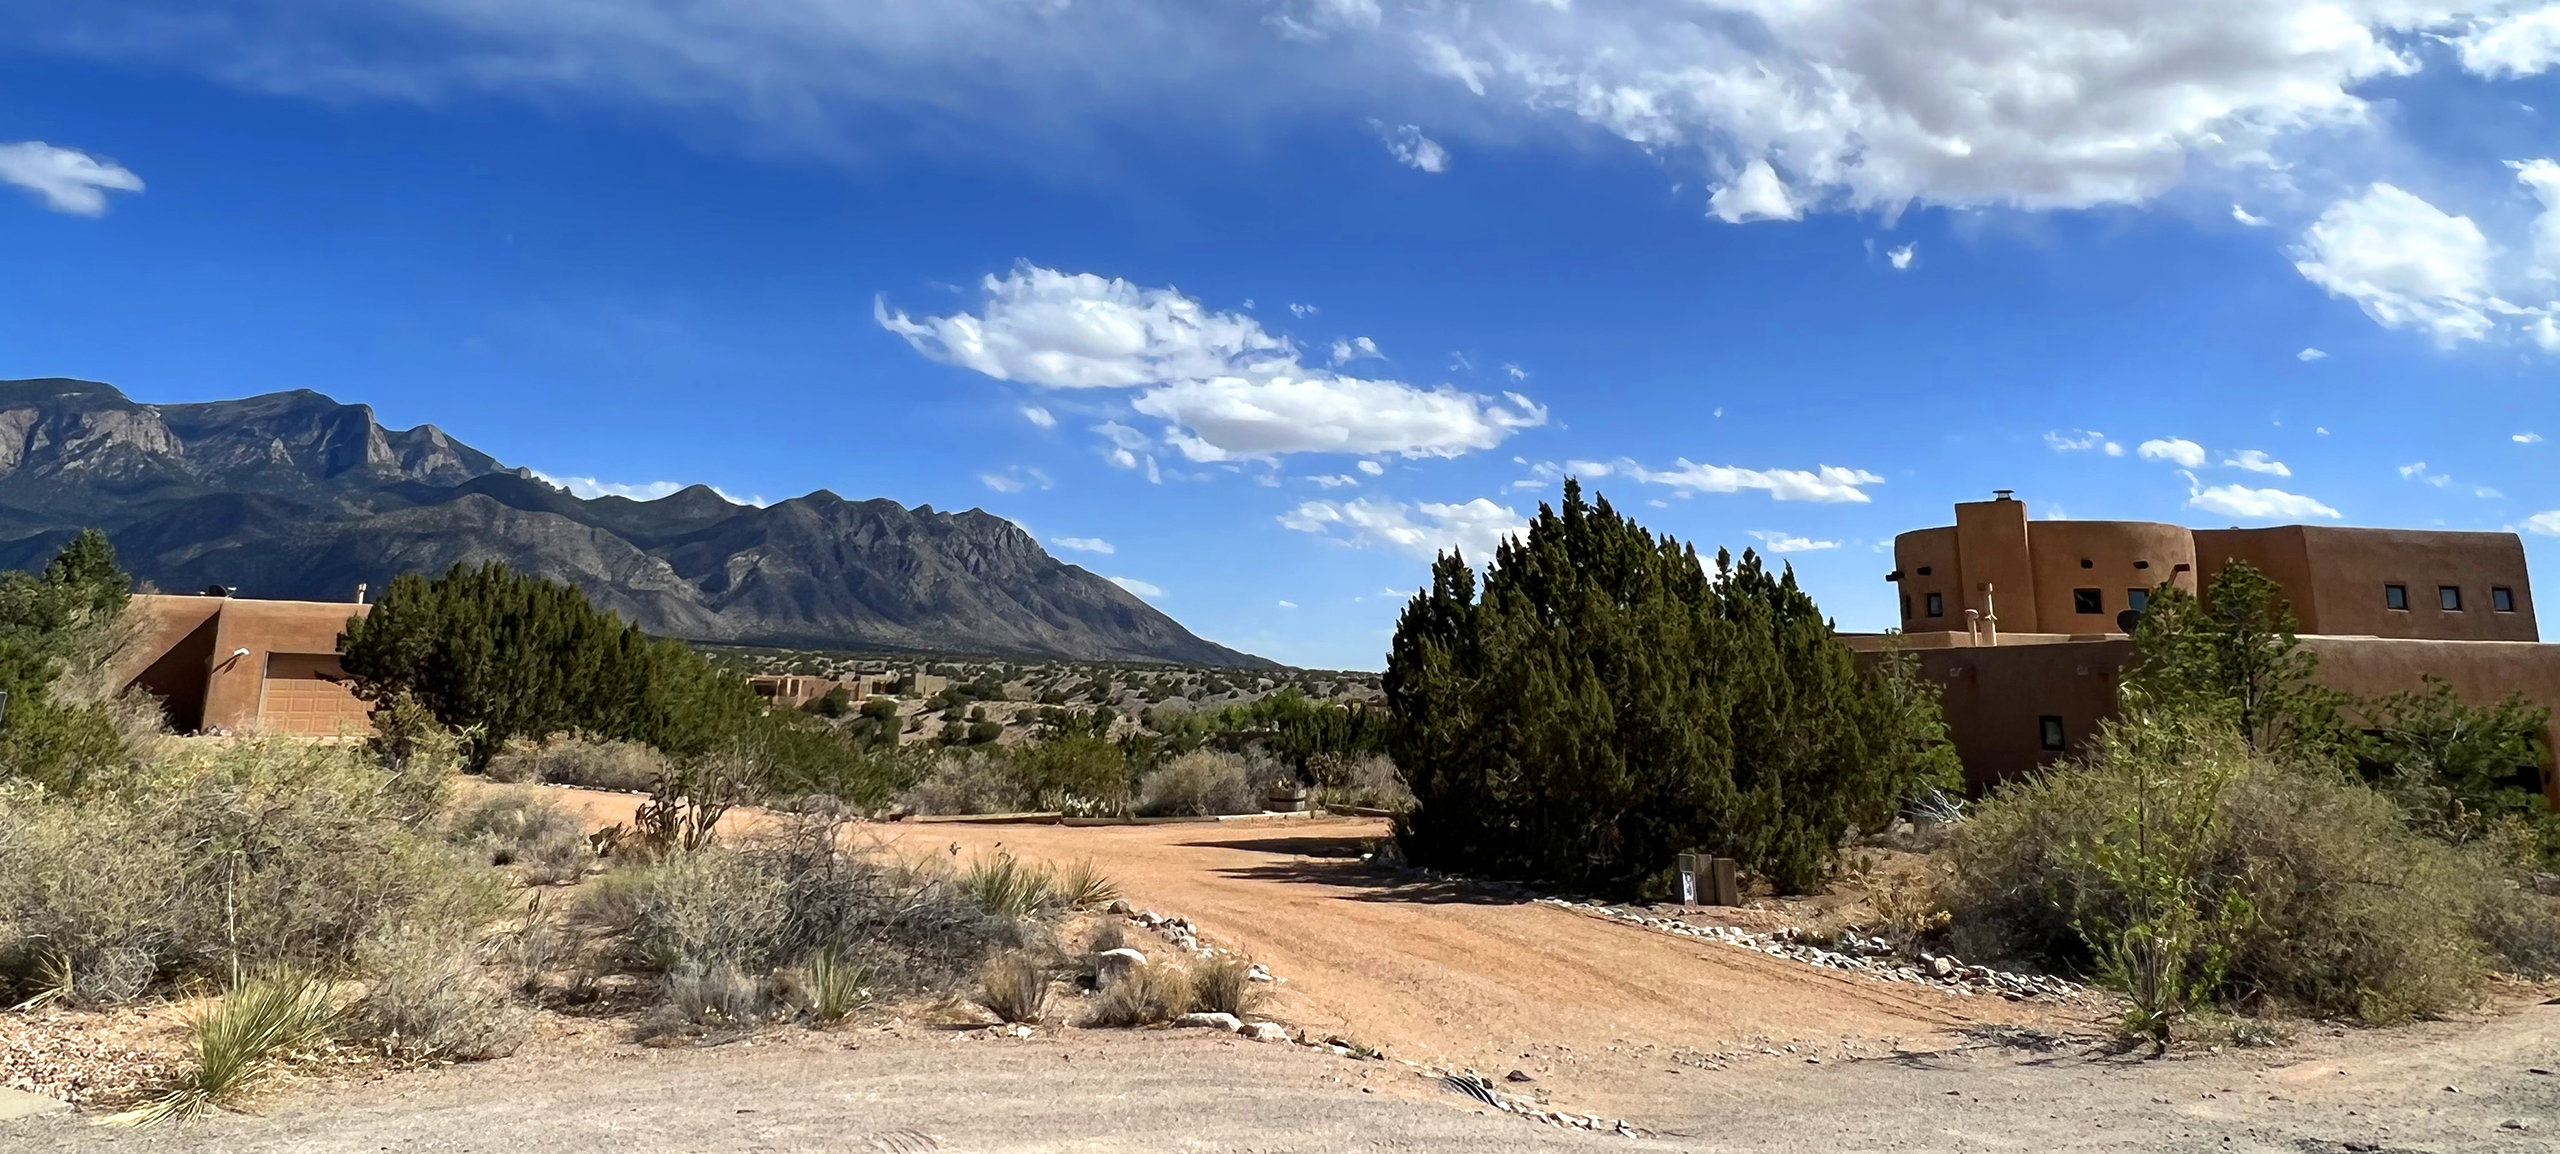 View of pueblo style homes in Placitas near the mountains of New Mexico